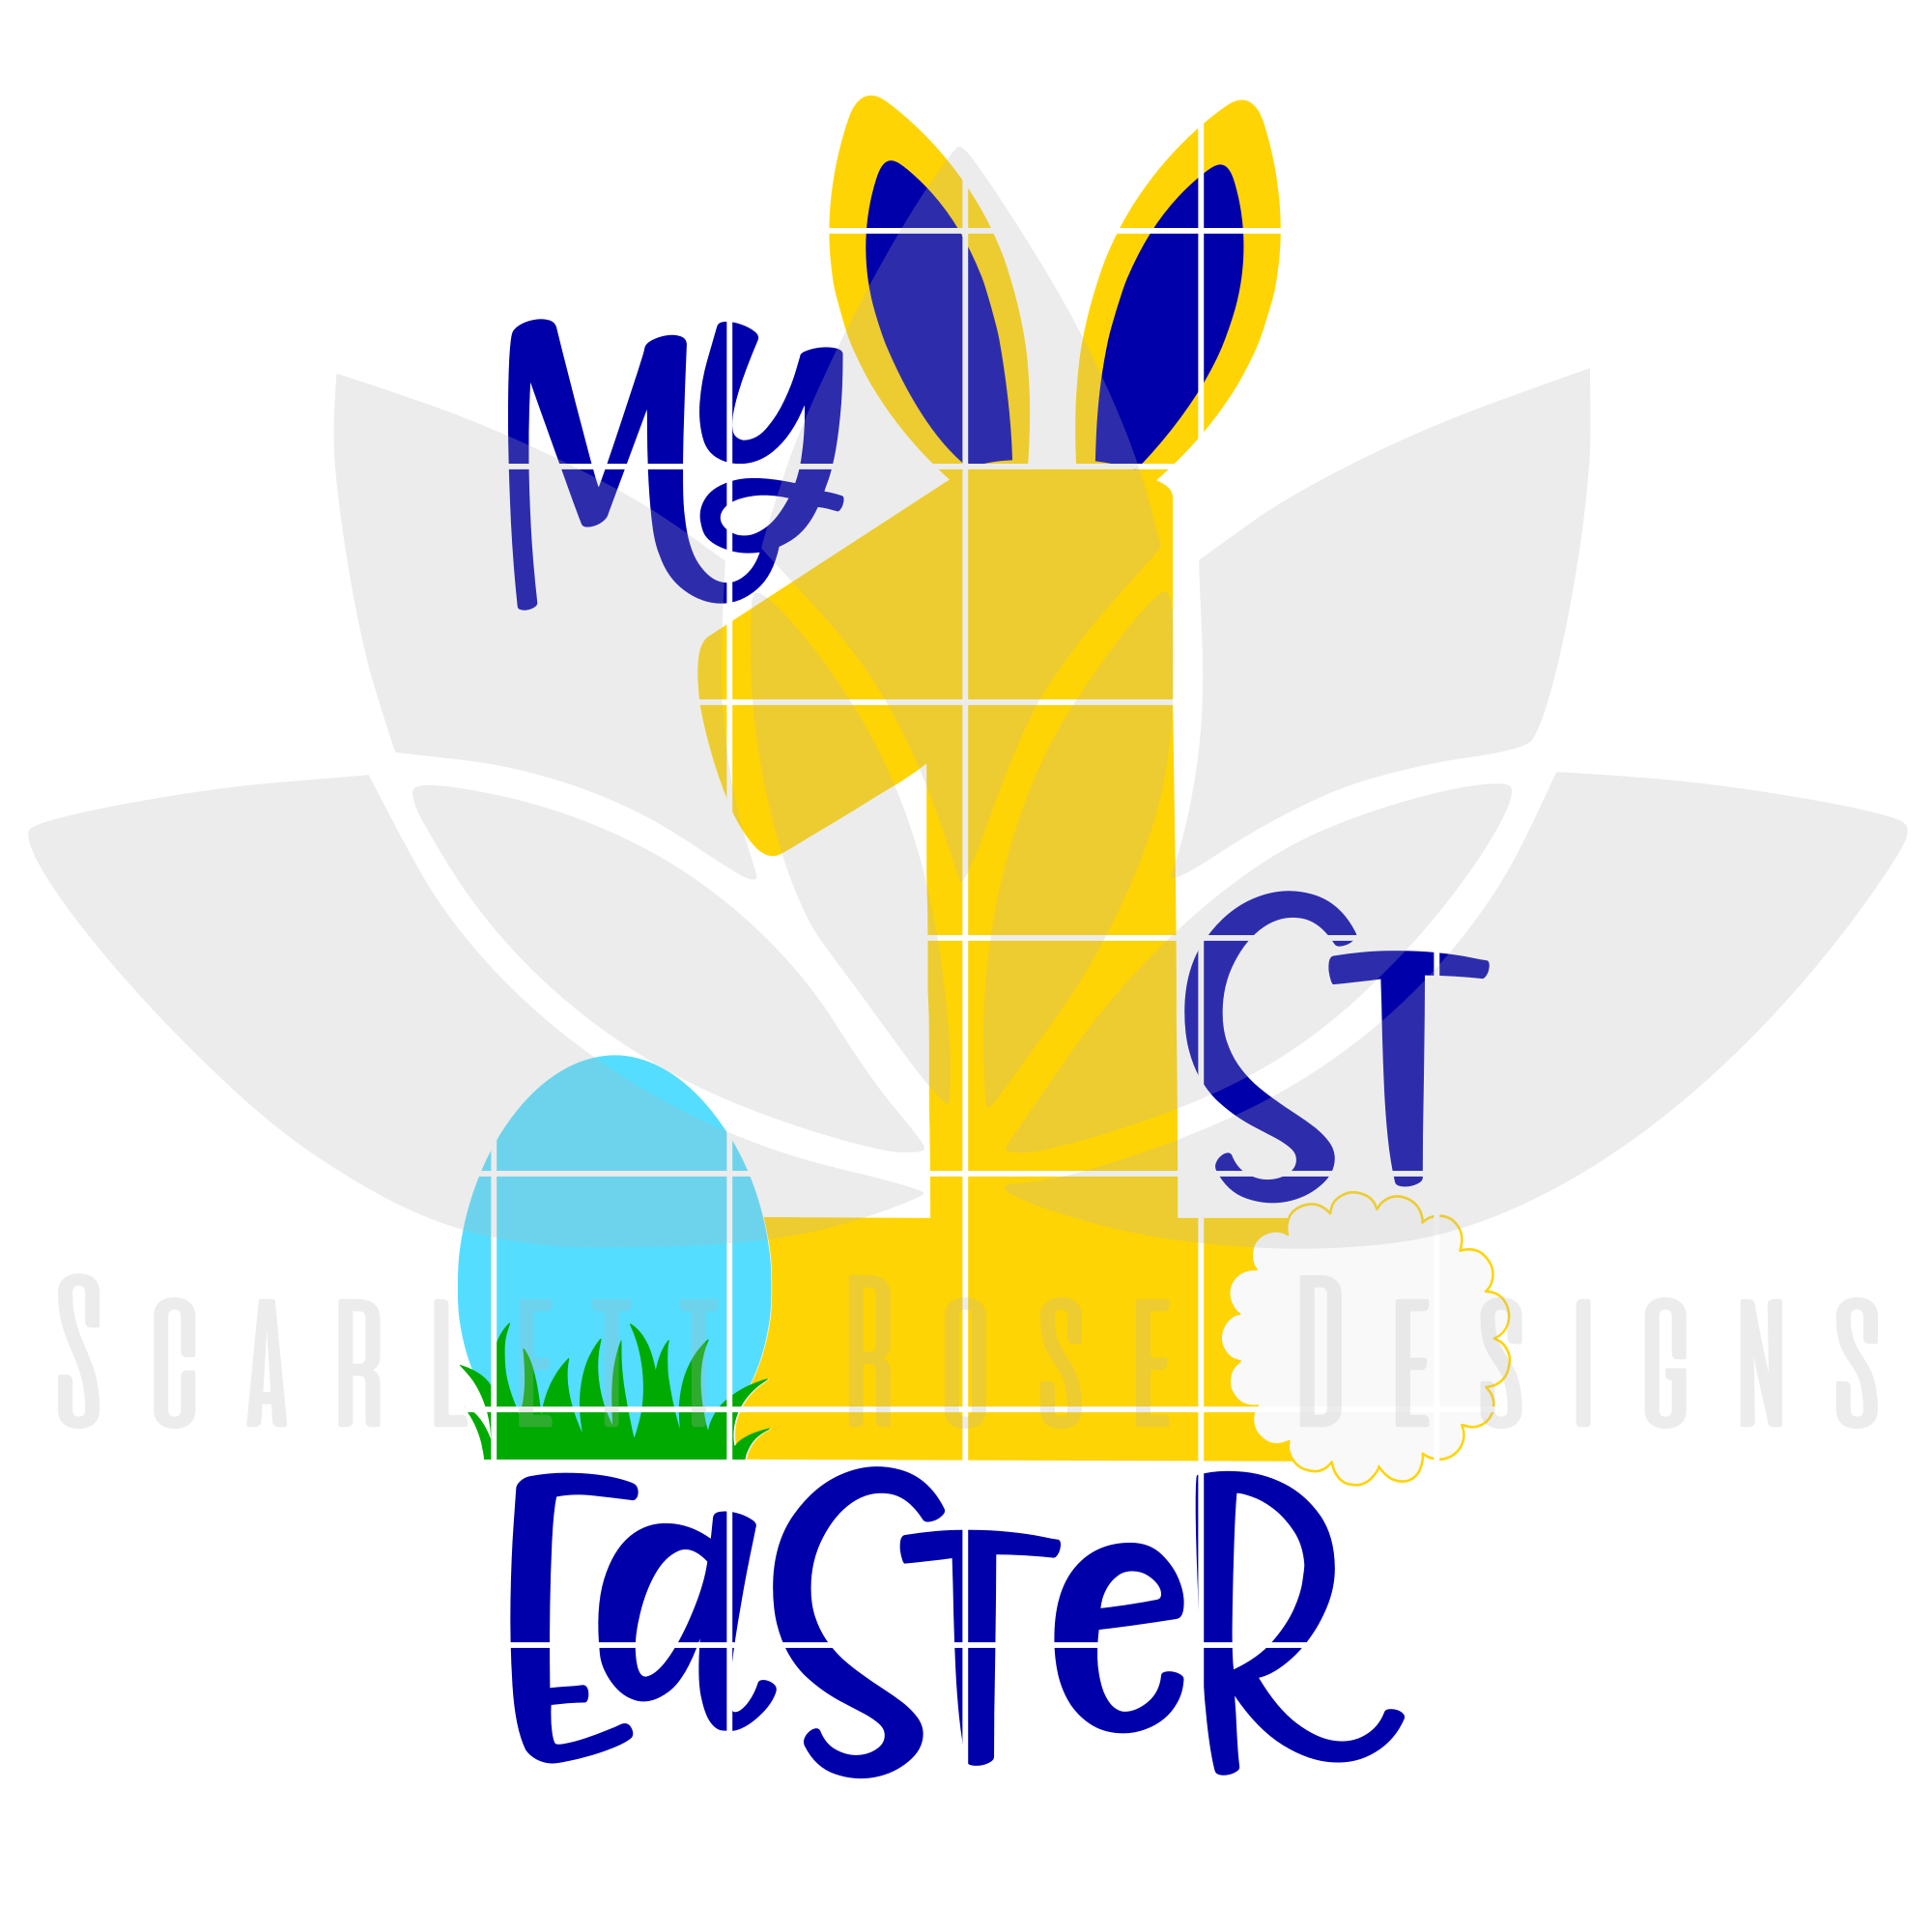 Download My First Easter, Easter Bunny SVG, DXF cut file - Scarlett ...